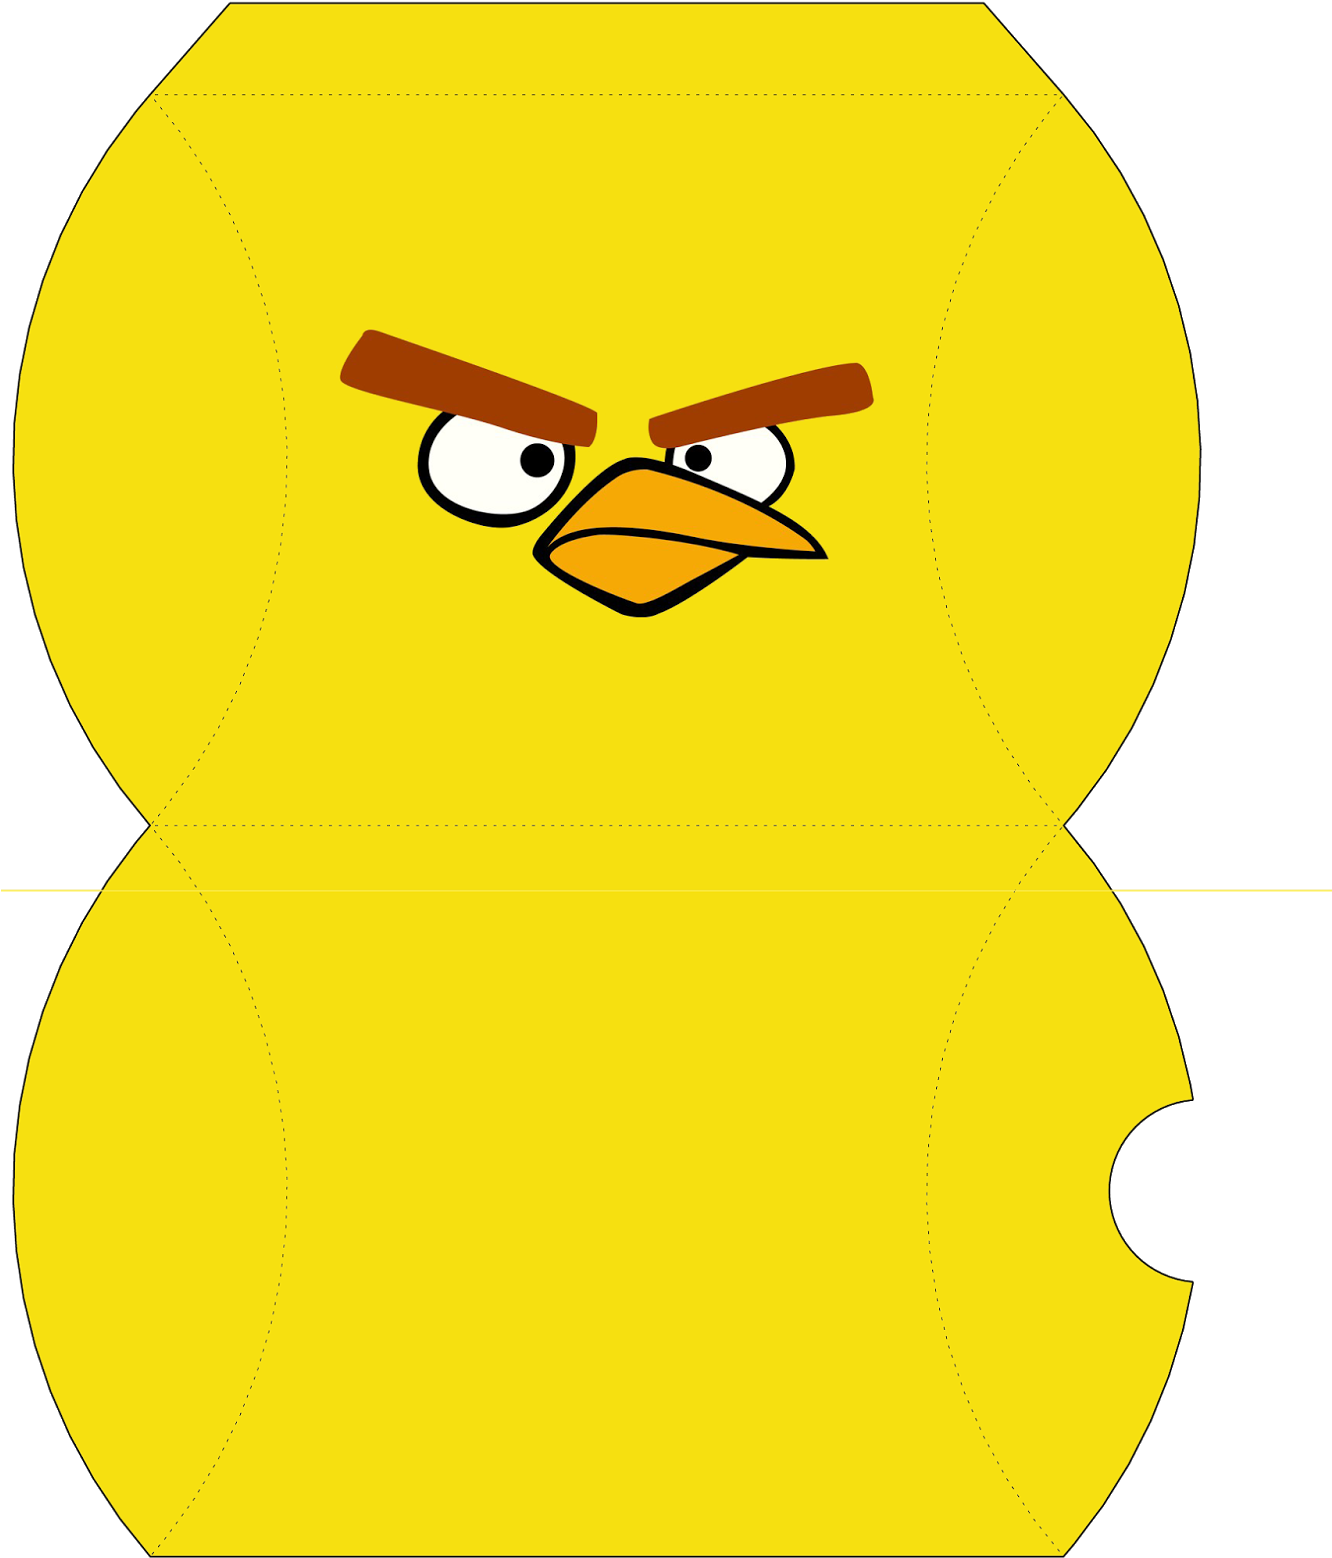 Your - Yellow Angry Bird (1331x1600)